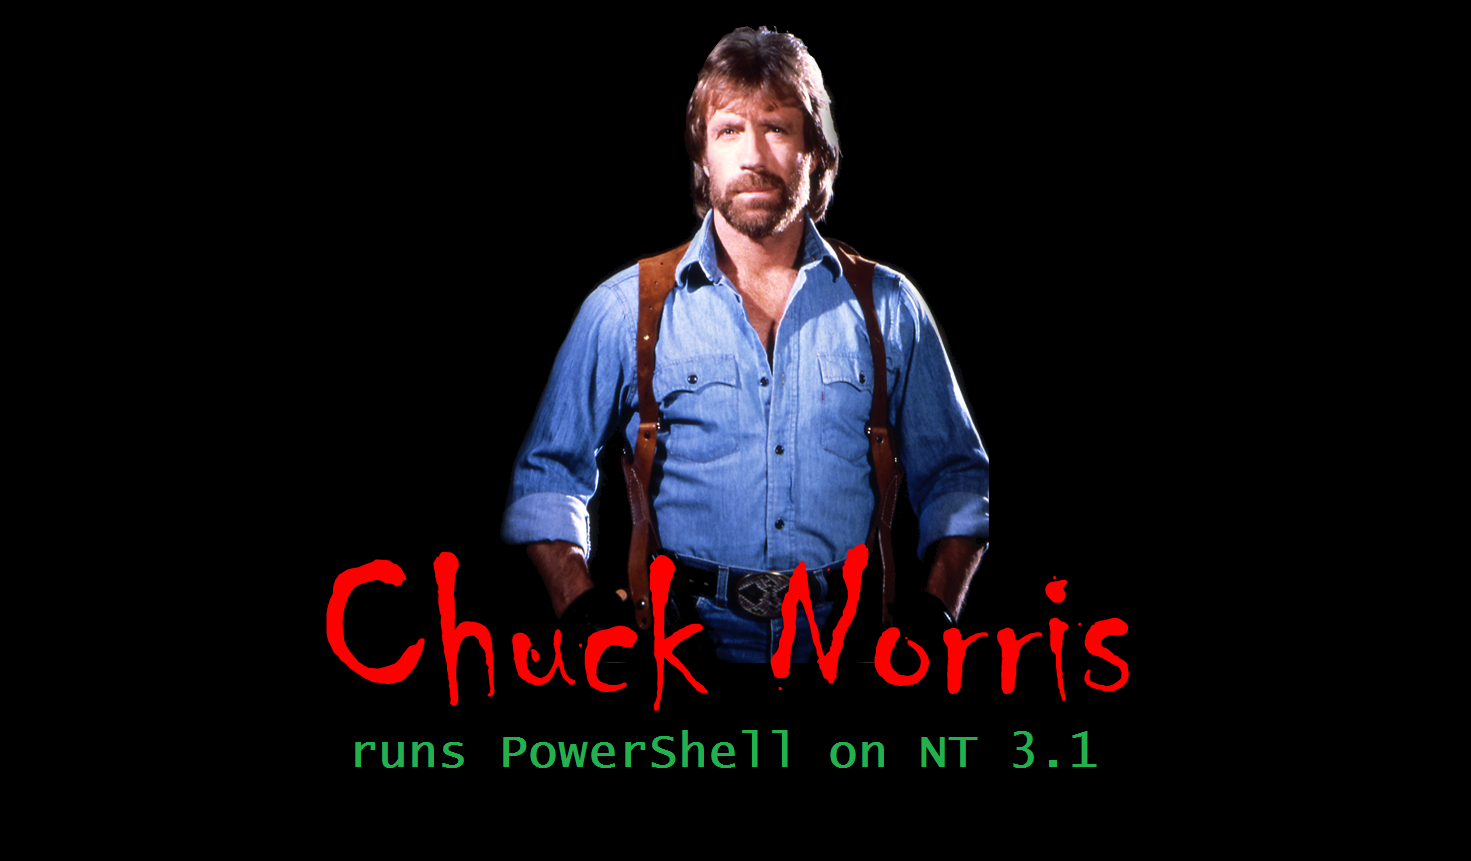 New Improved Formula Powershell And Chuck Norris Wallpaper